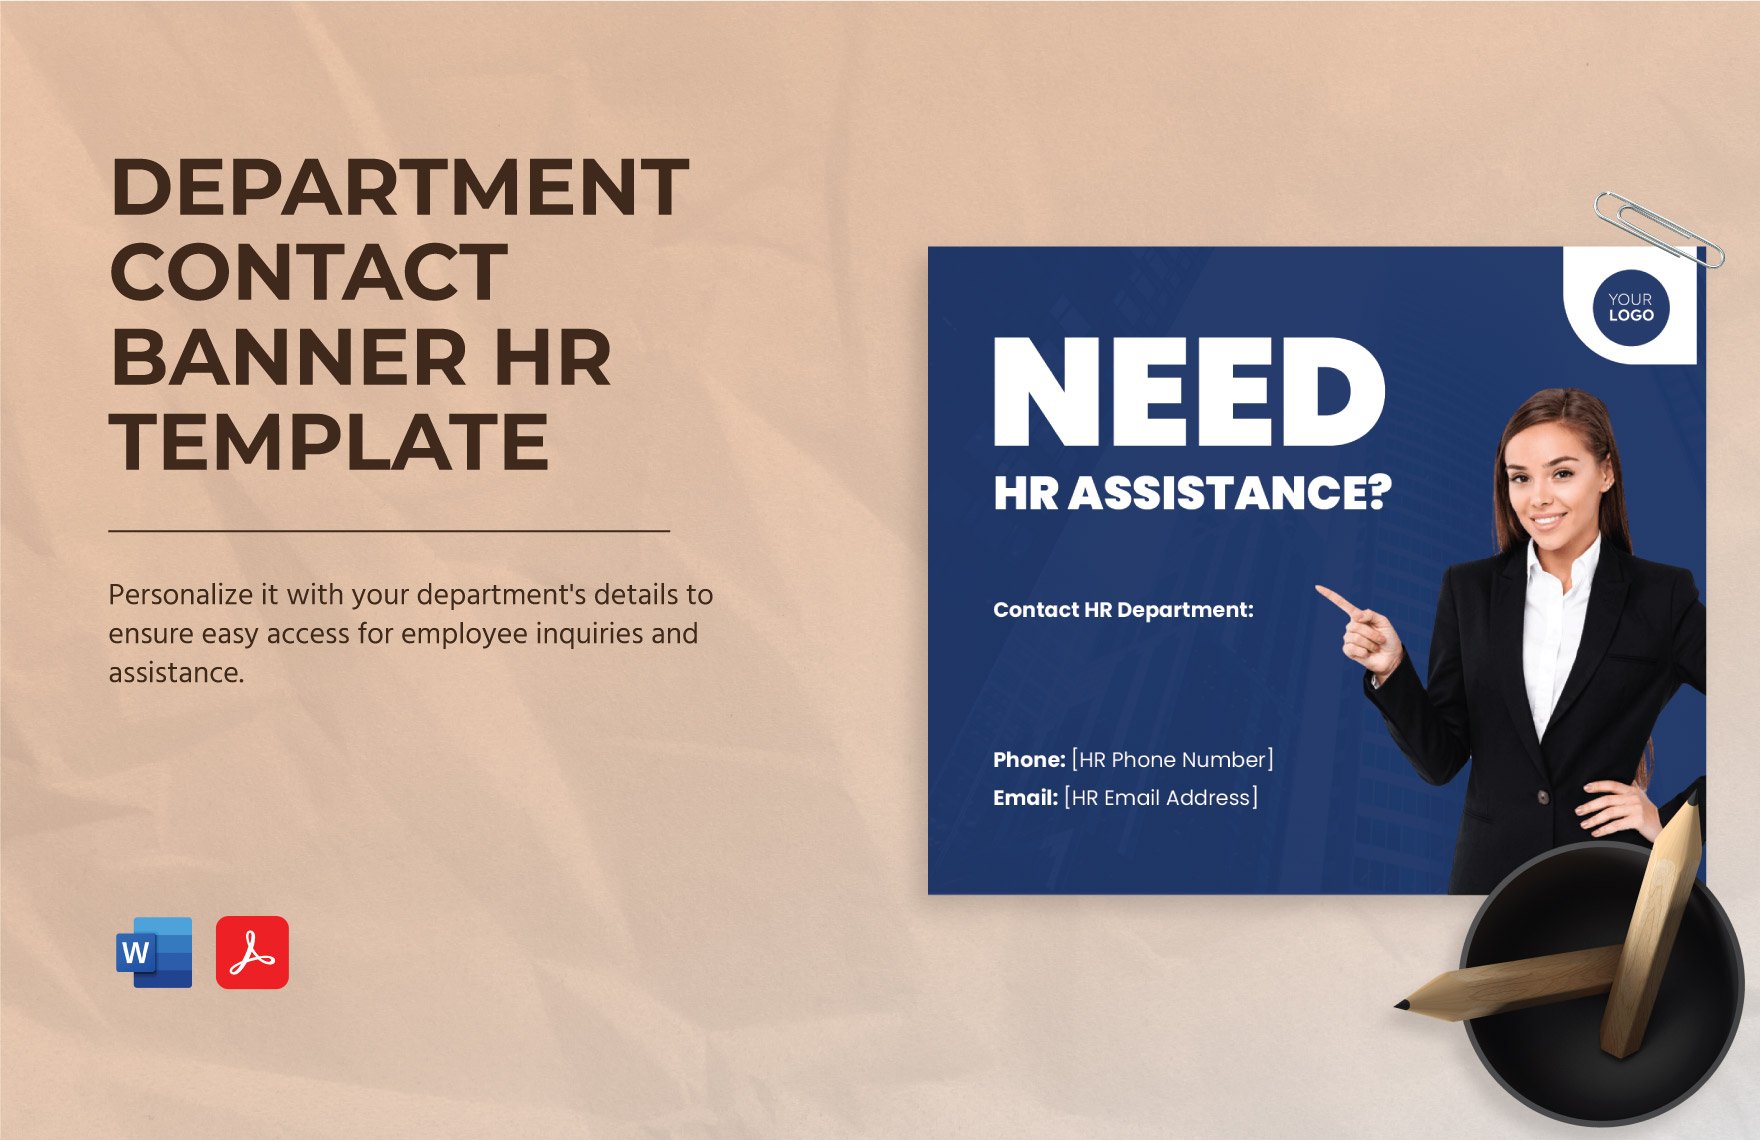 Department Contact Banner HR Template